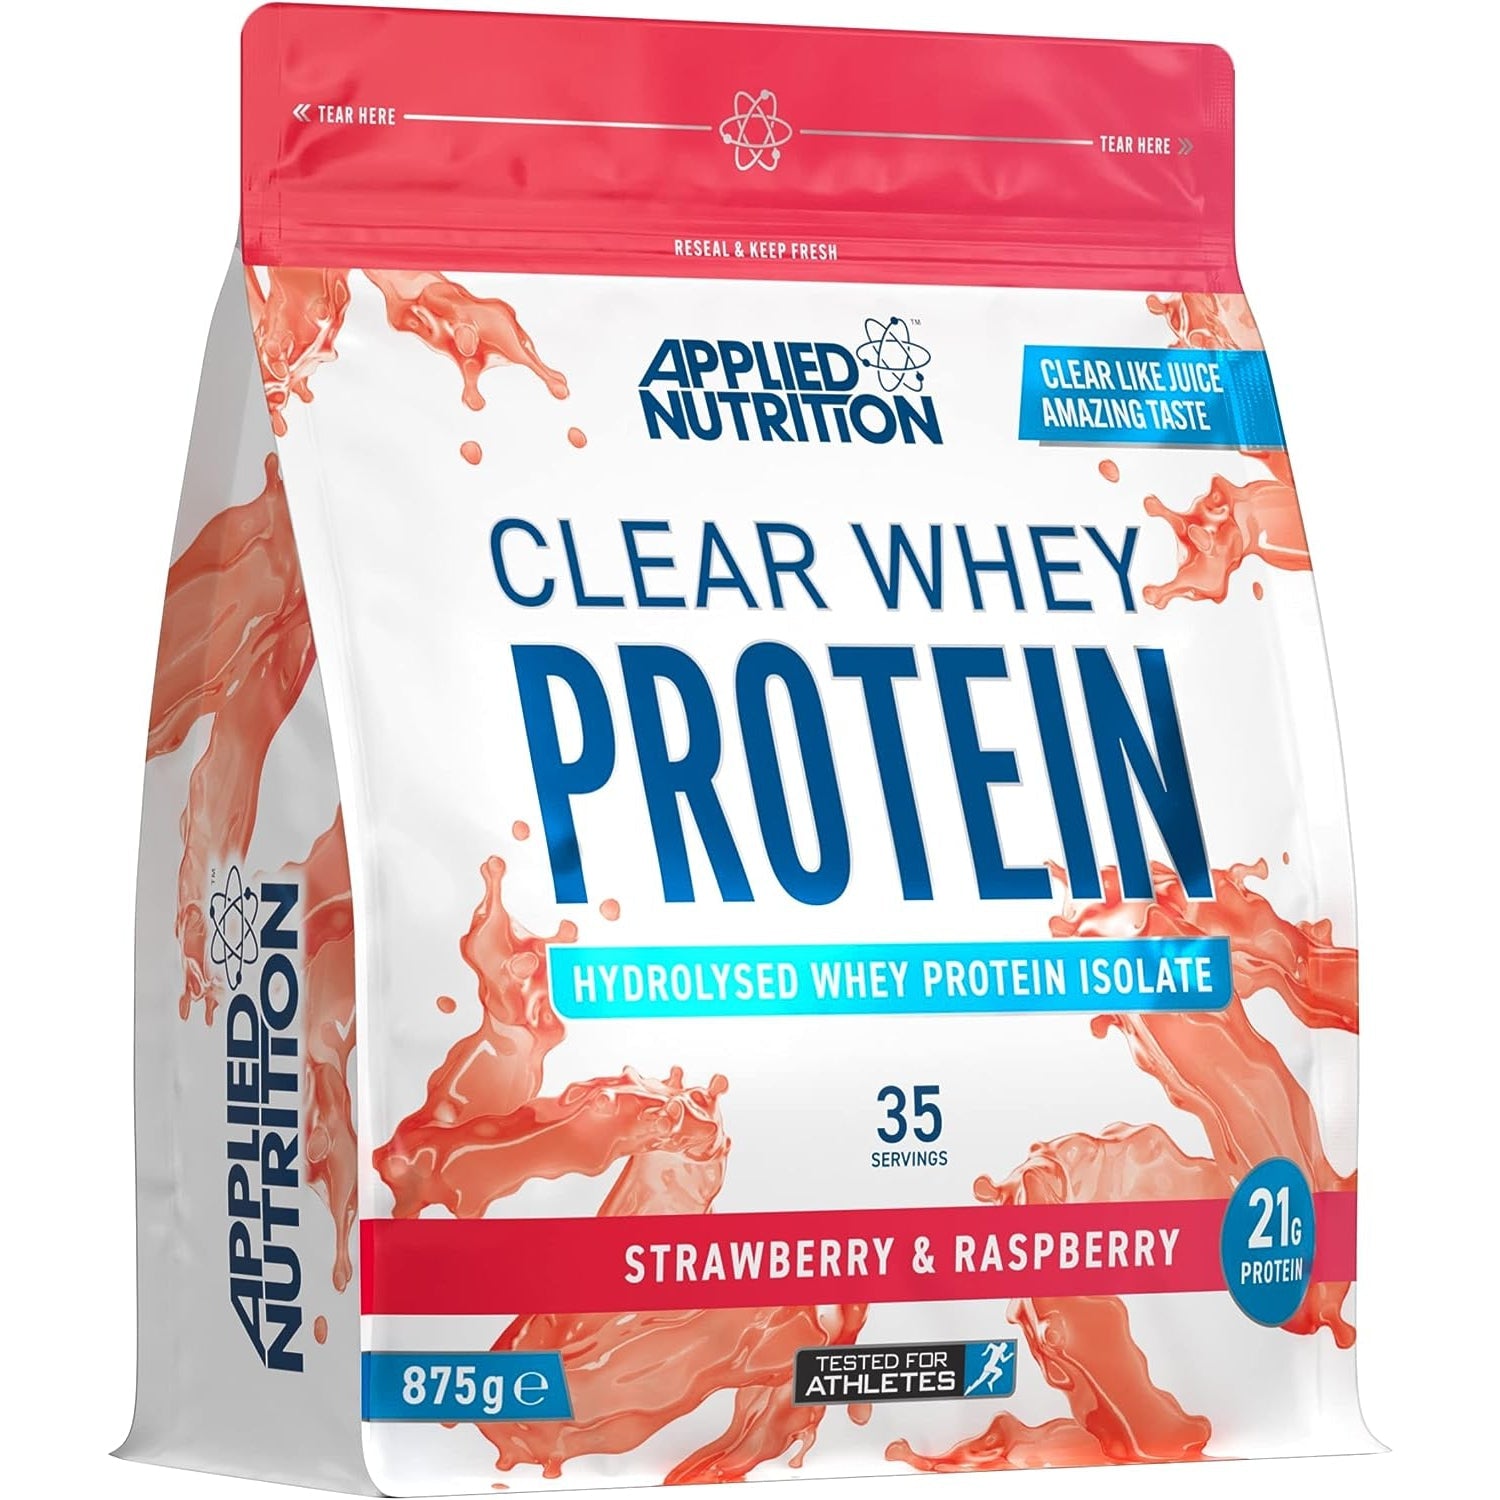 Applied Nutrition Clear Whey Protein Hydrolysed Whey Protein Isolate 875g 35 Servings Strawberry & Raspberry